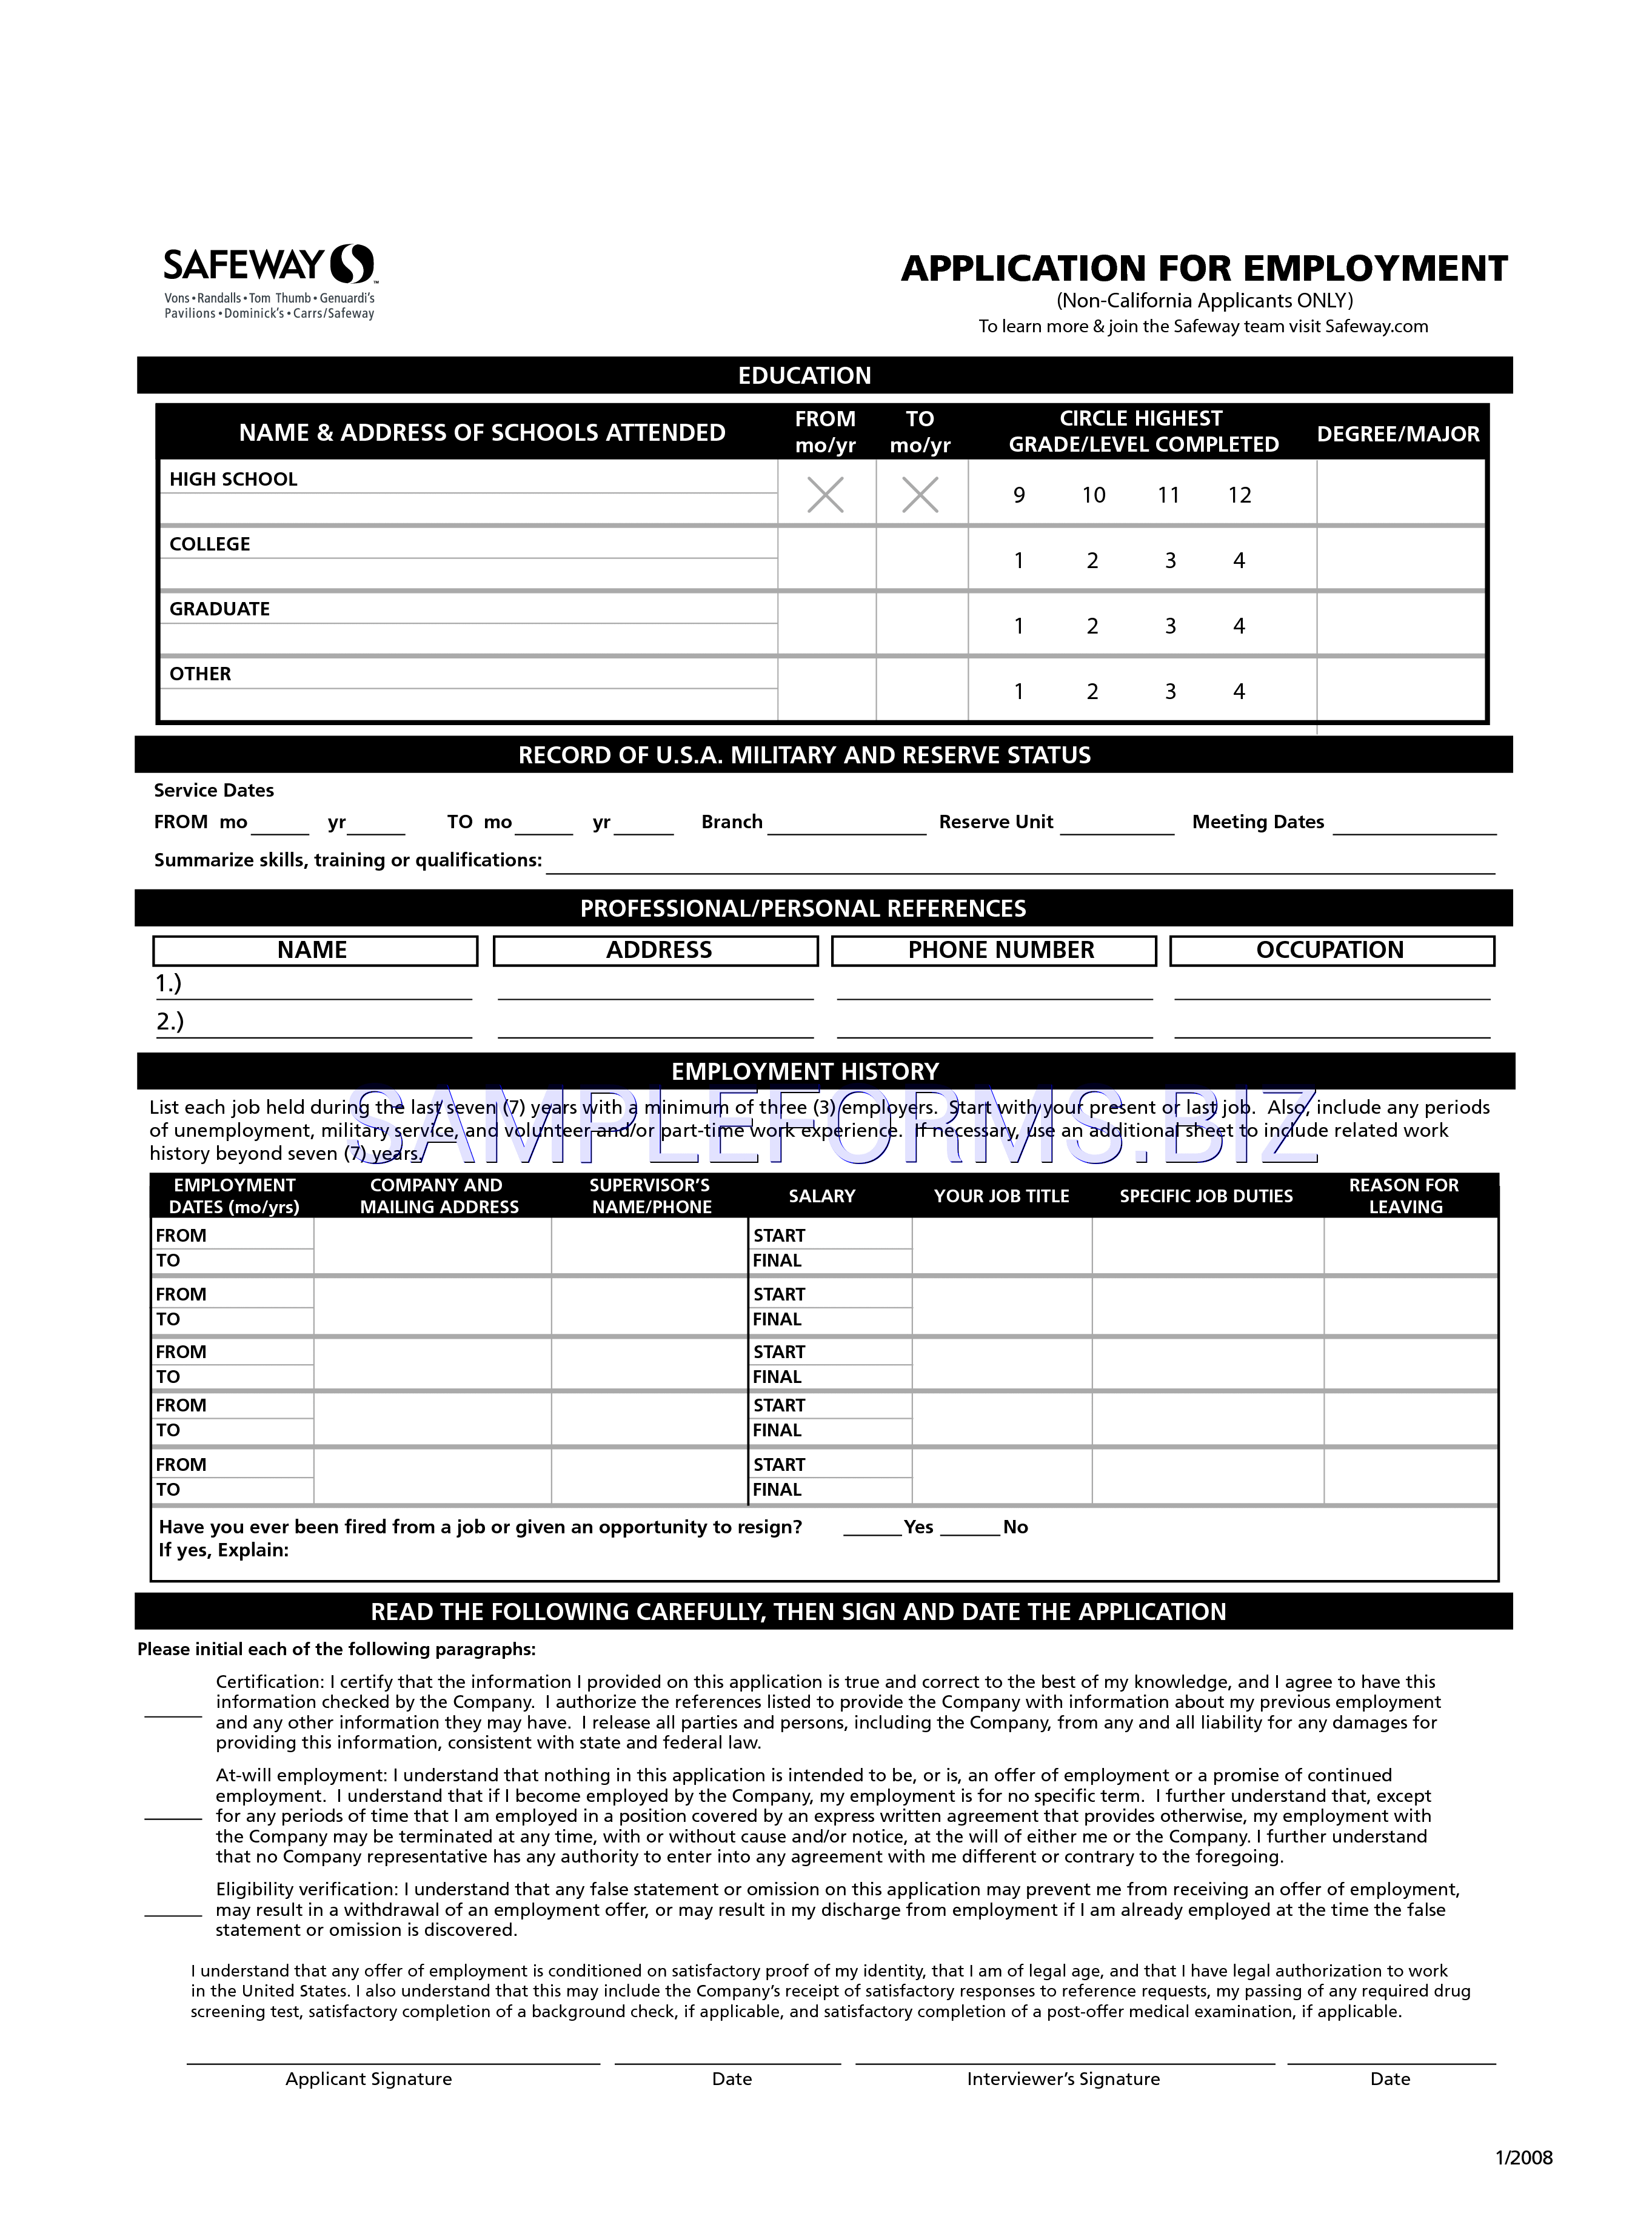 Preview free downloadable Safeway Job Application (Non-California Applicants ONLY) in PDF (page 2)